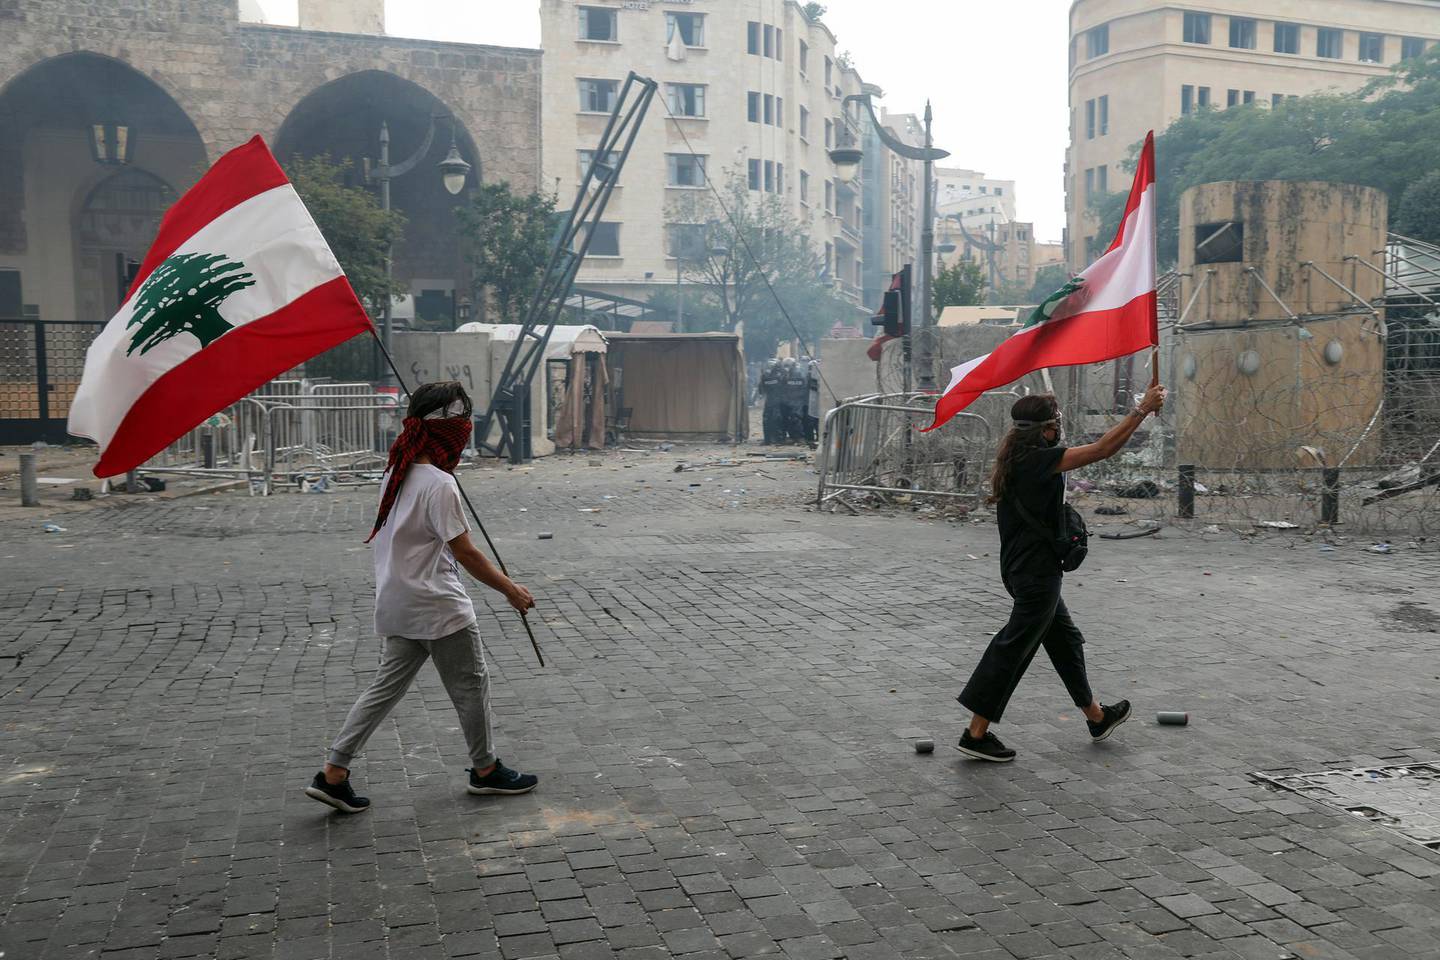 Protesters wave Lebanese national flags during a demonstration close to parliament in Beirut, Lebanon, on Saturday, Aug. 8, 2020. Lebanese protesters took to the streets of Beirut on Saturday amid growing anger at the government following the devastating blast that killed dozens this week. Photographer: Hasan Shaaban/Bloomberg